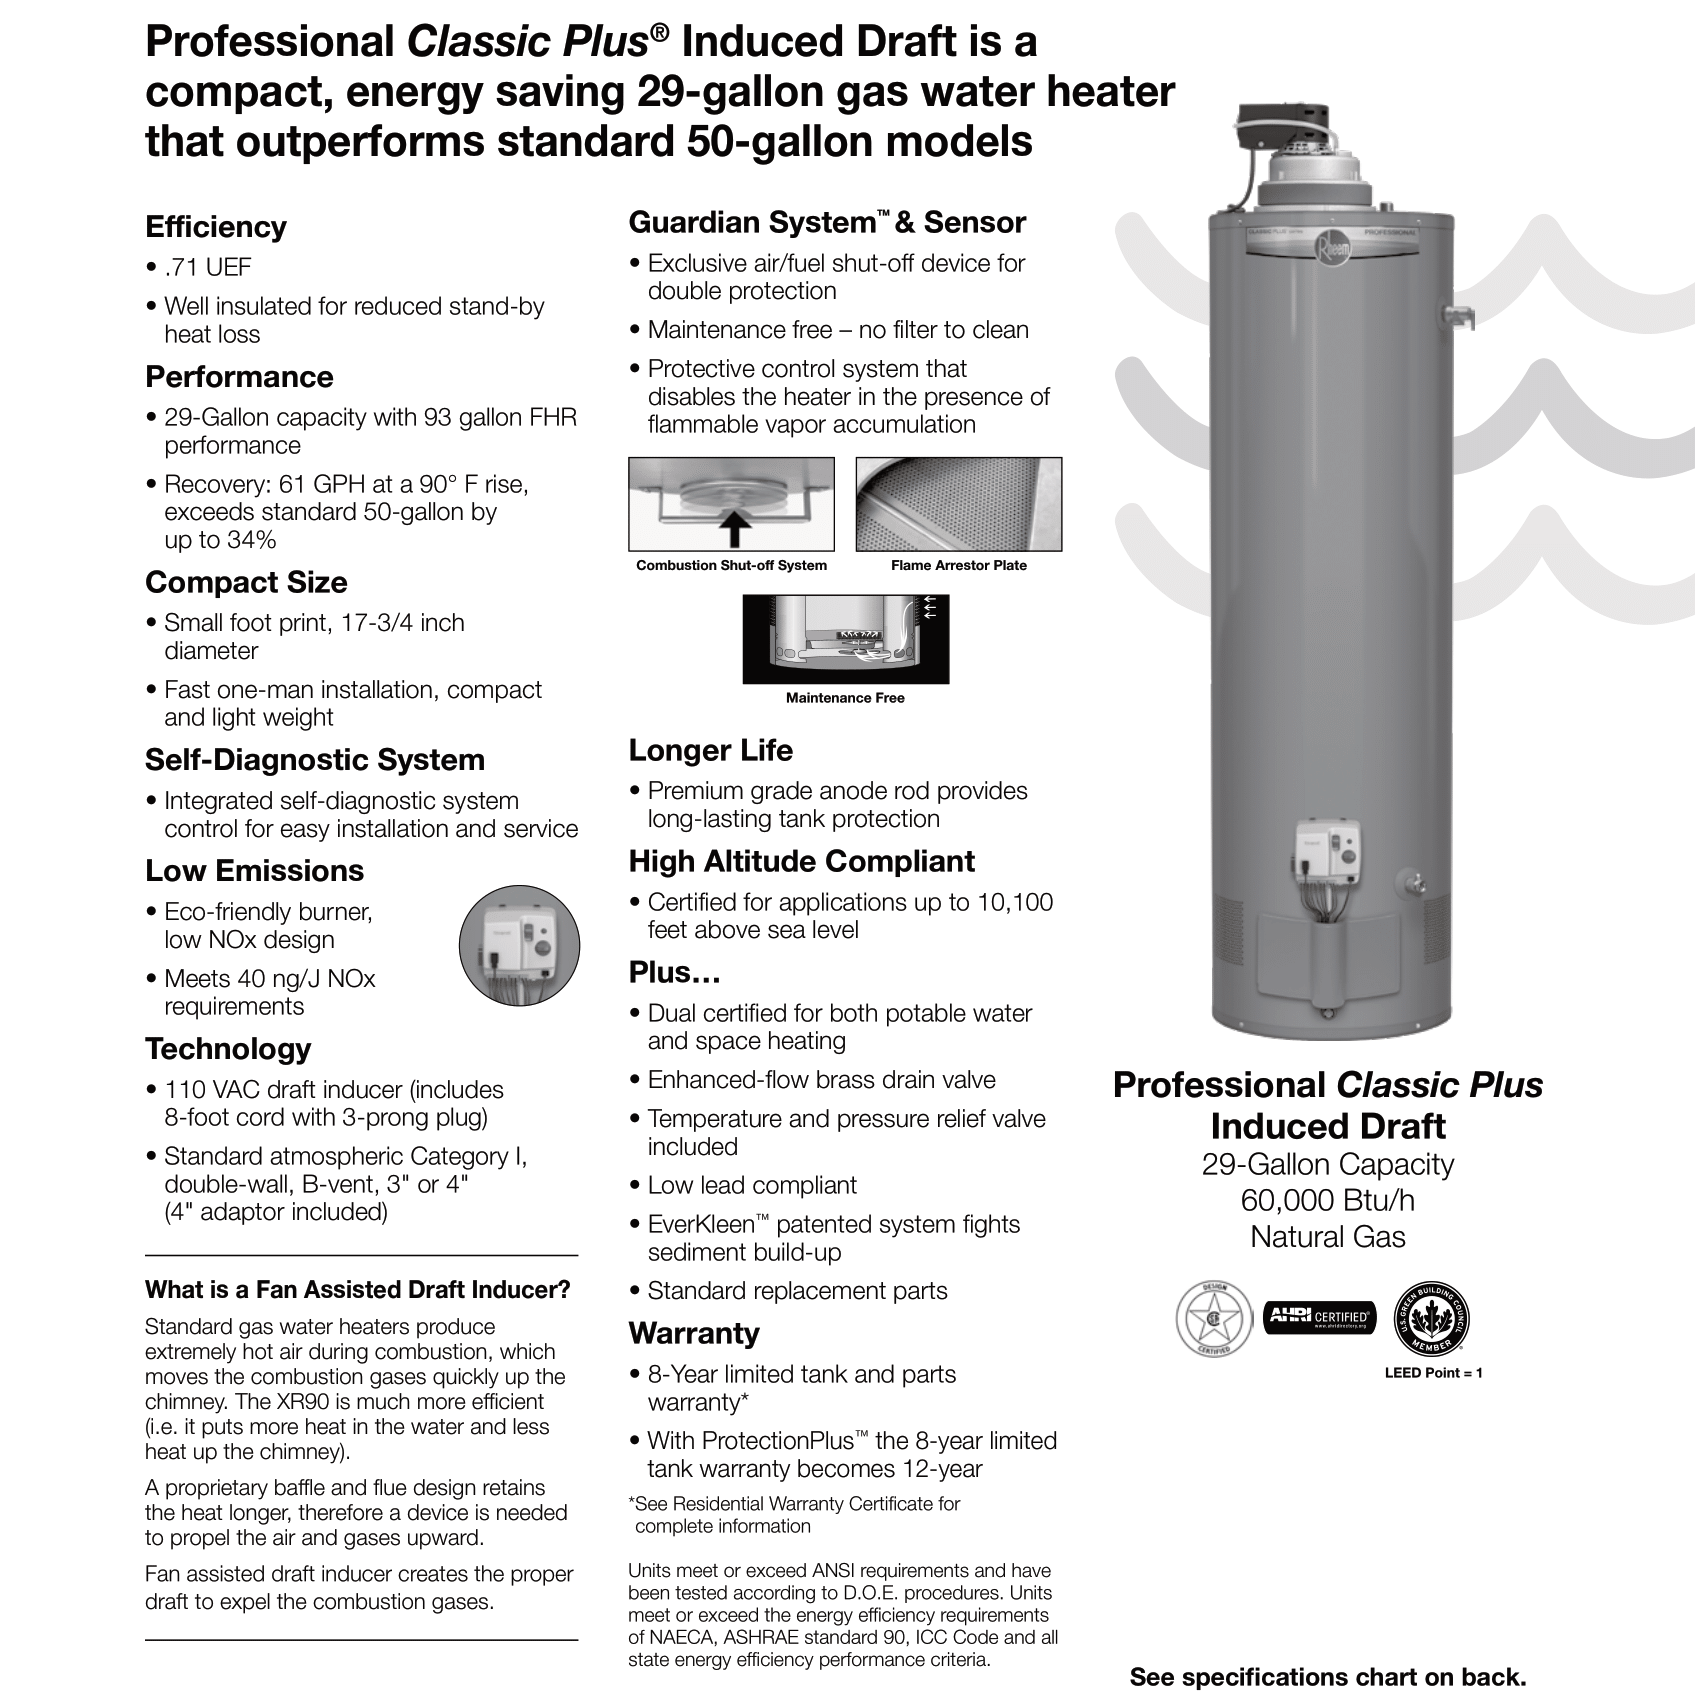 Professional Classic Plus Induced Draft is a compact, energy-saving 29-gallon water heater that outperforms 20-gallon models